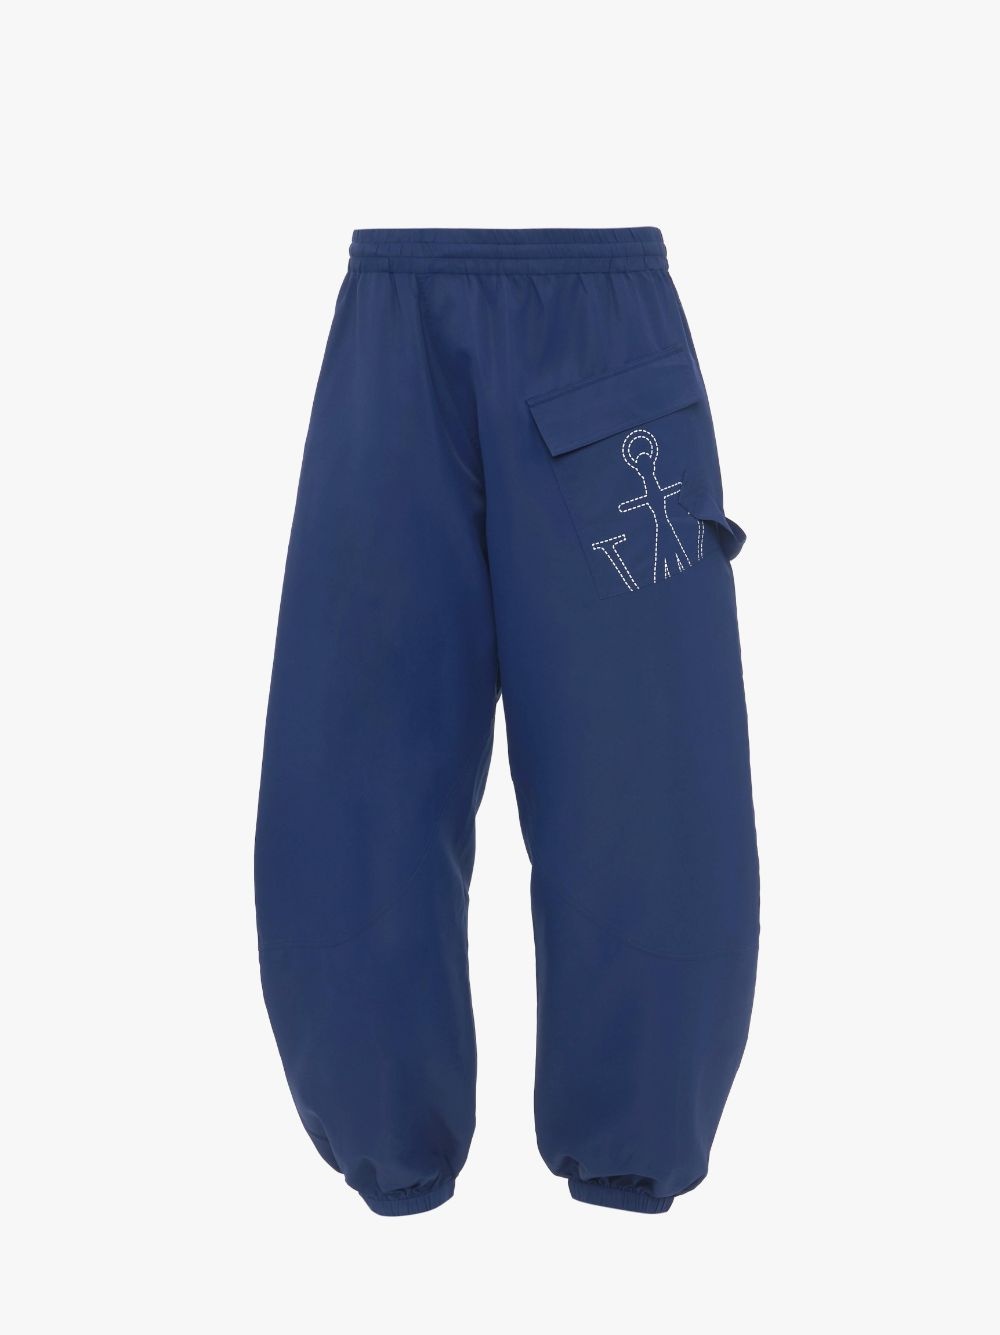 TWISTED JOGGERS WITH ANCHOR LOGO PRINT - 1